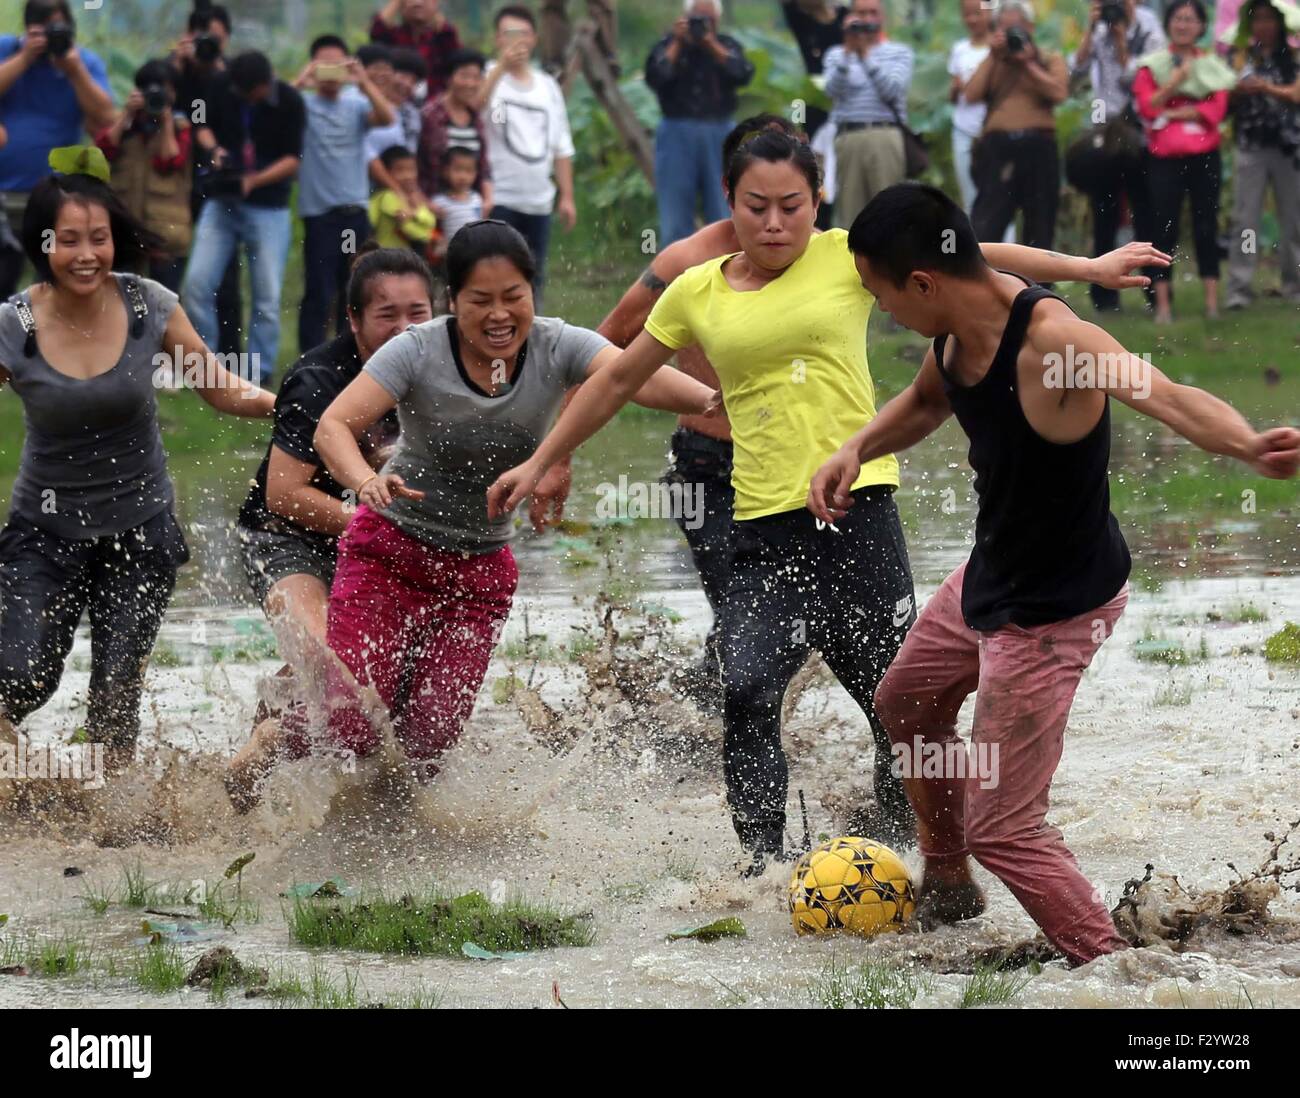 Wuyi, China's Zhejiang Province. 26th Sep, 2015. People play soccer in mud in Housangyuan Village of Lyutan Township of Wuyi County, east China's Zhejiang Province, Sept. 26, 2015. Local villagers held a mud soccer competition to celebrate the upcoming Mid-Autumn Festival. Credit:  Ge Yuejin/Xinhua/Alamy Live News Stock Photo